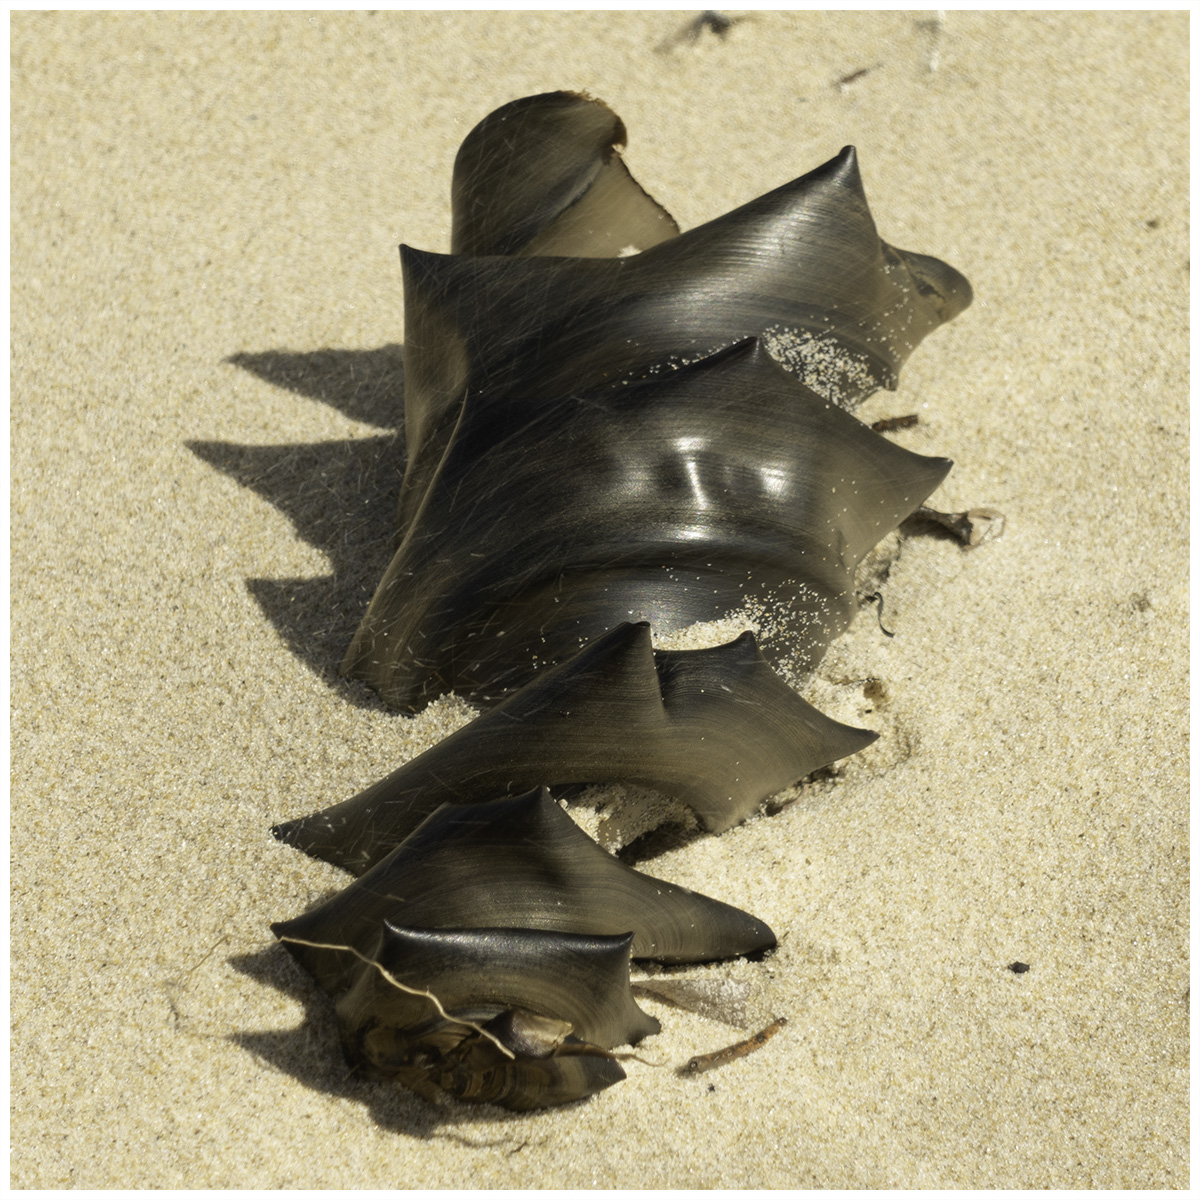 Creature Feature: What do you know about the shark that laid this egg?